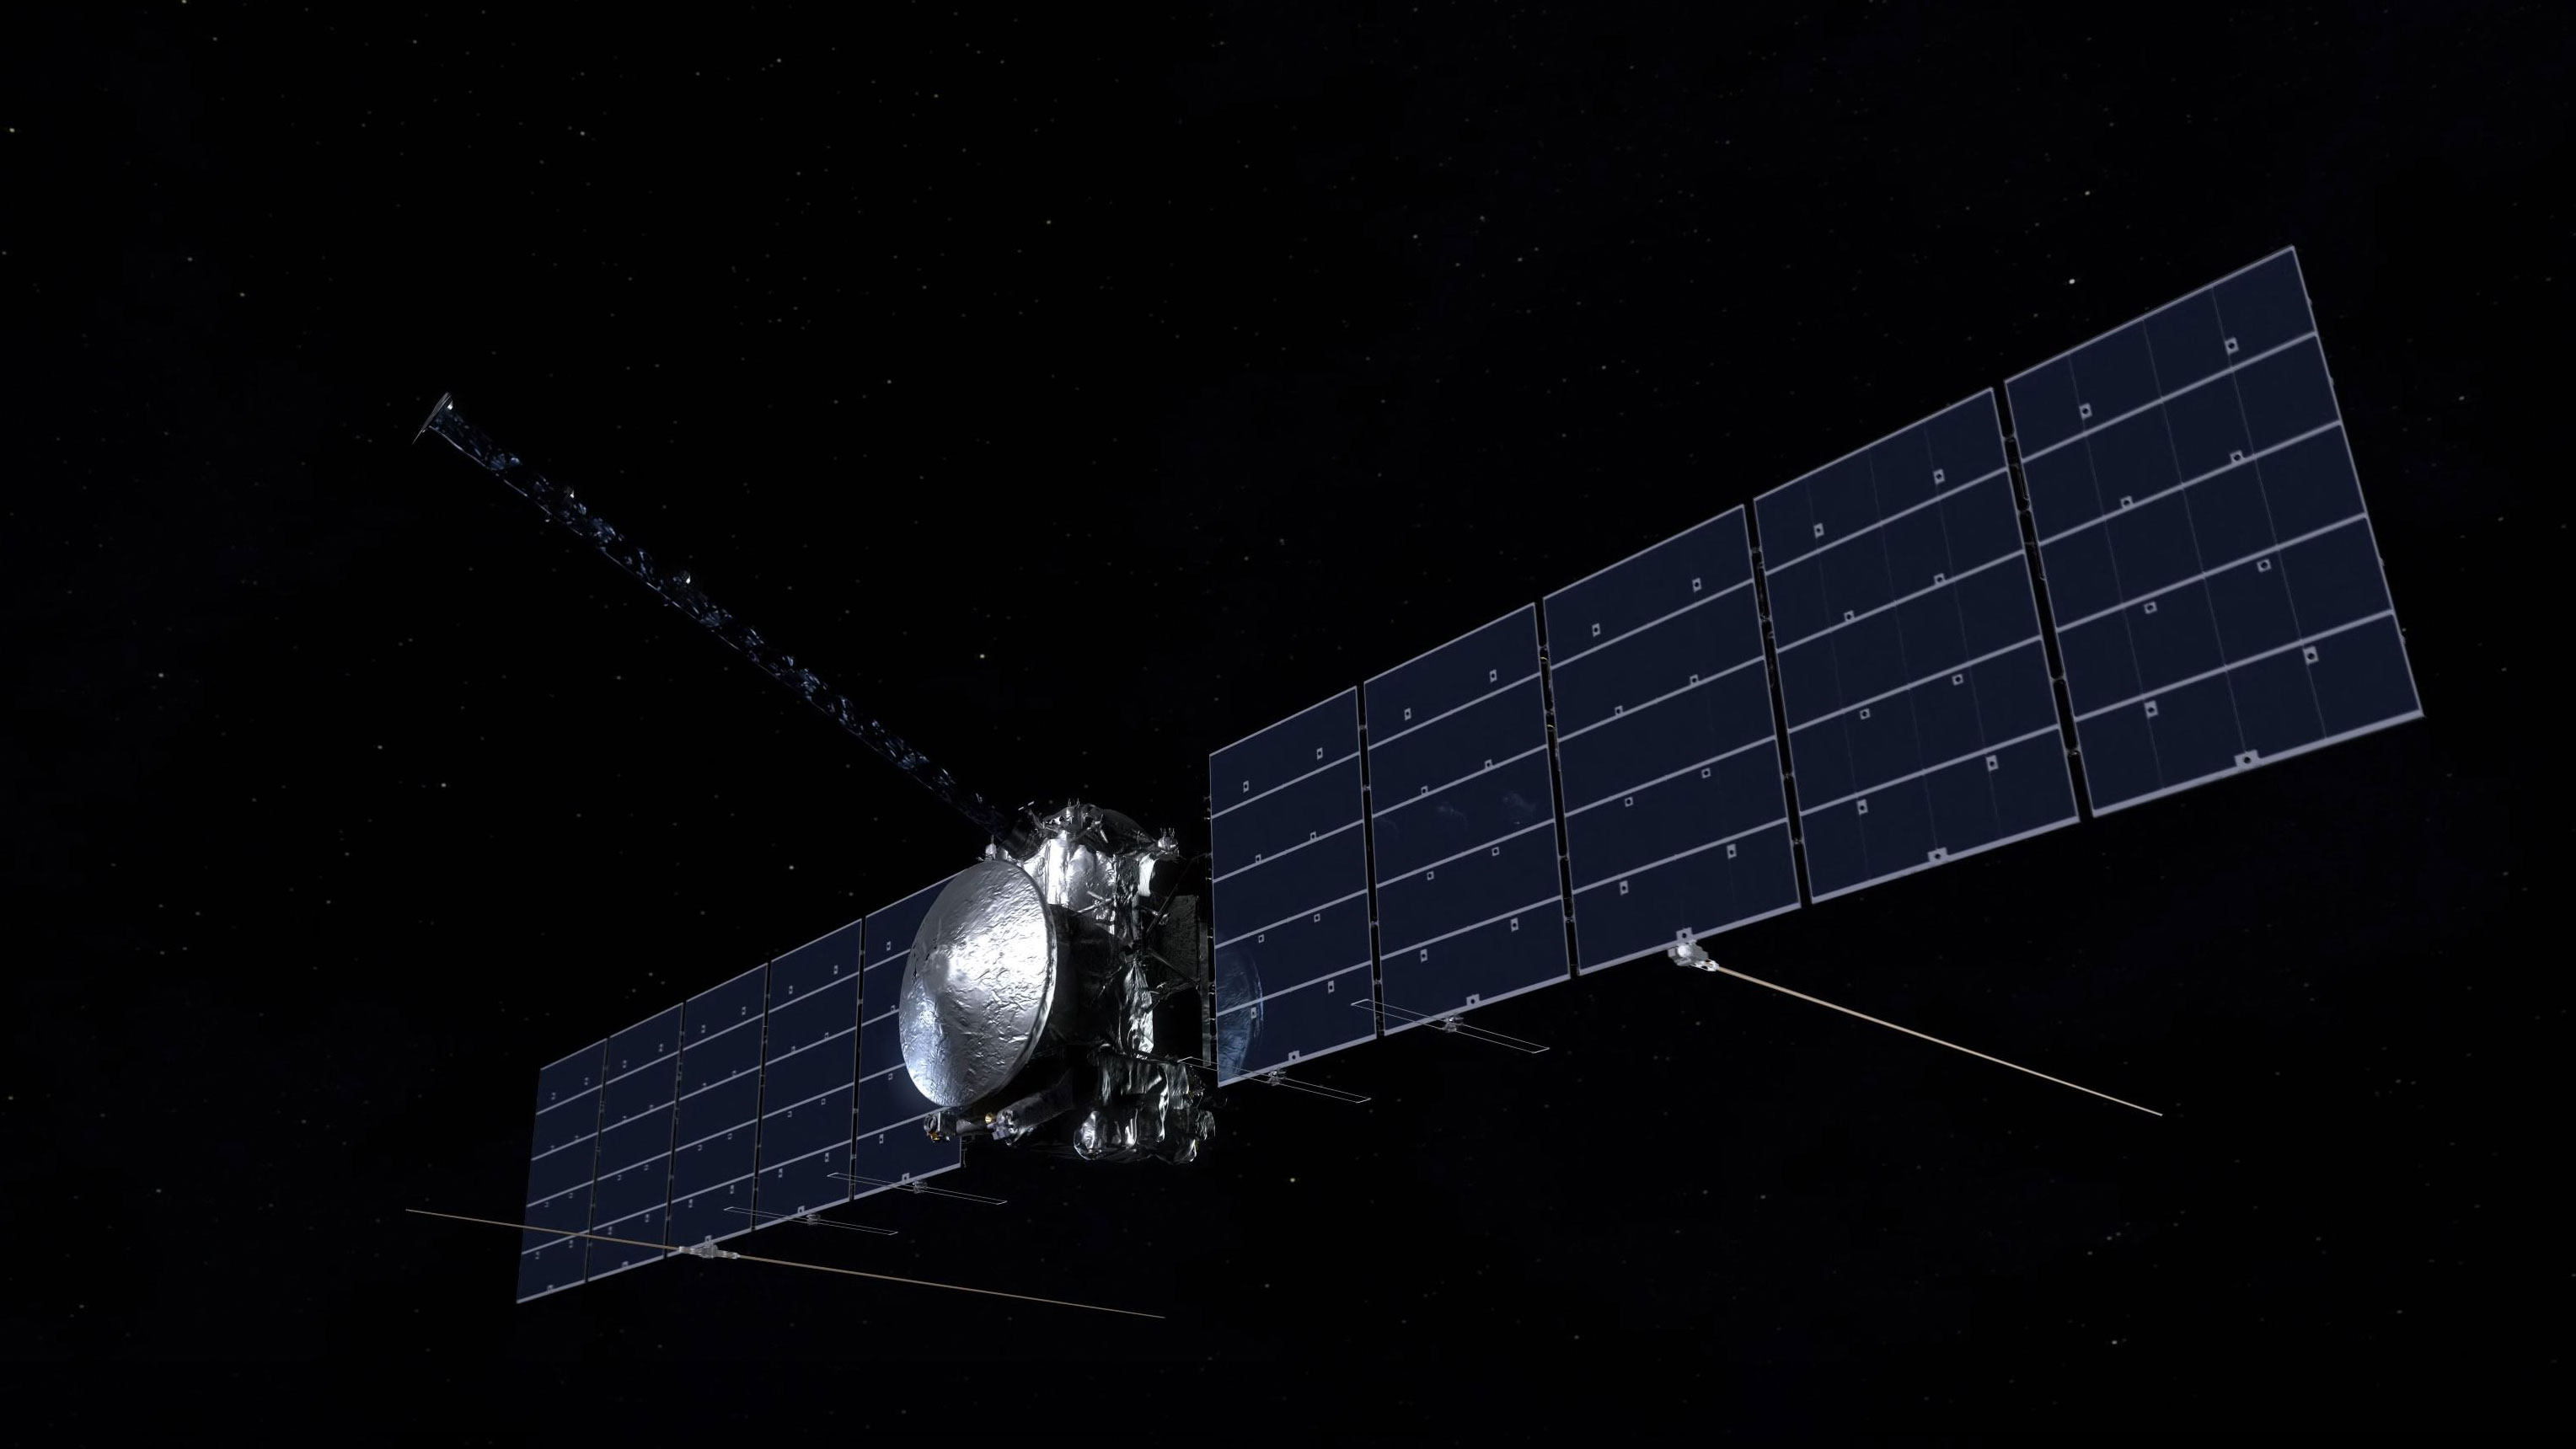 A screengrab from an animation showing Europa Clipper in space.